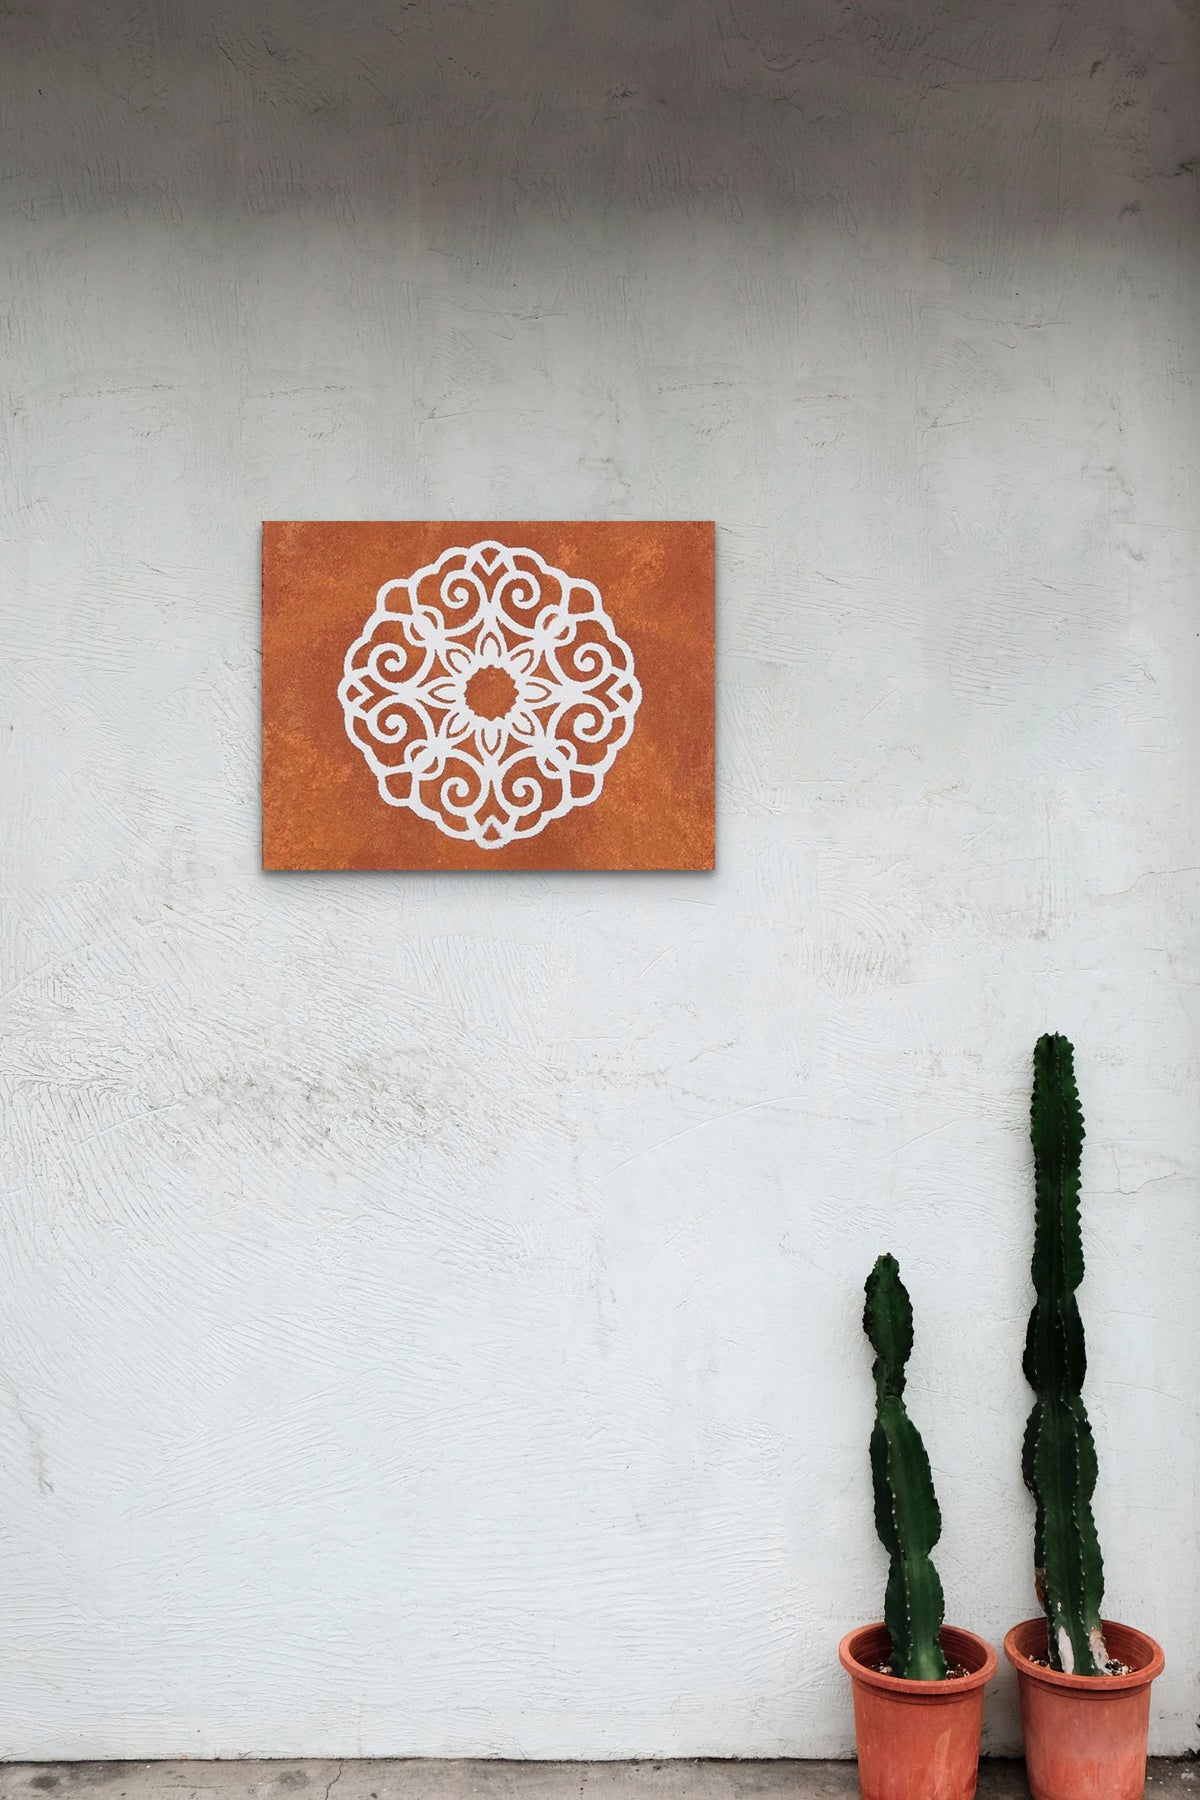 16&quot;x 20&quot;  Weathered Granite and Acrylic on Canvas.  A medallion inspired by an original Florentine tile painted on a terra-cotta colored granite base.  Great for an outdoor patio wall!  Painted by Monica Hampton